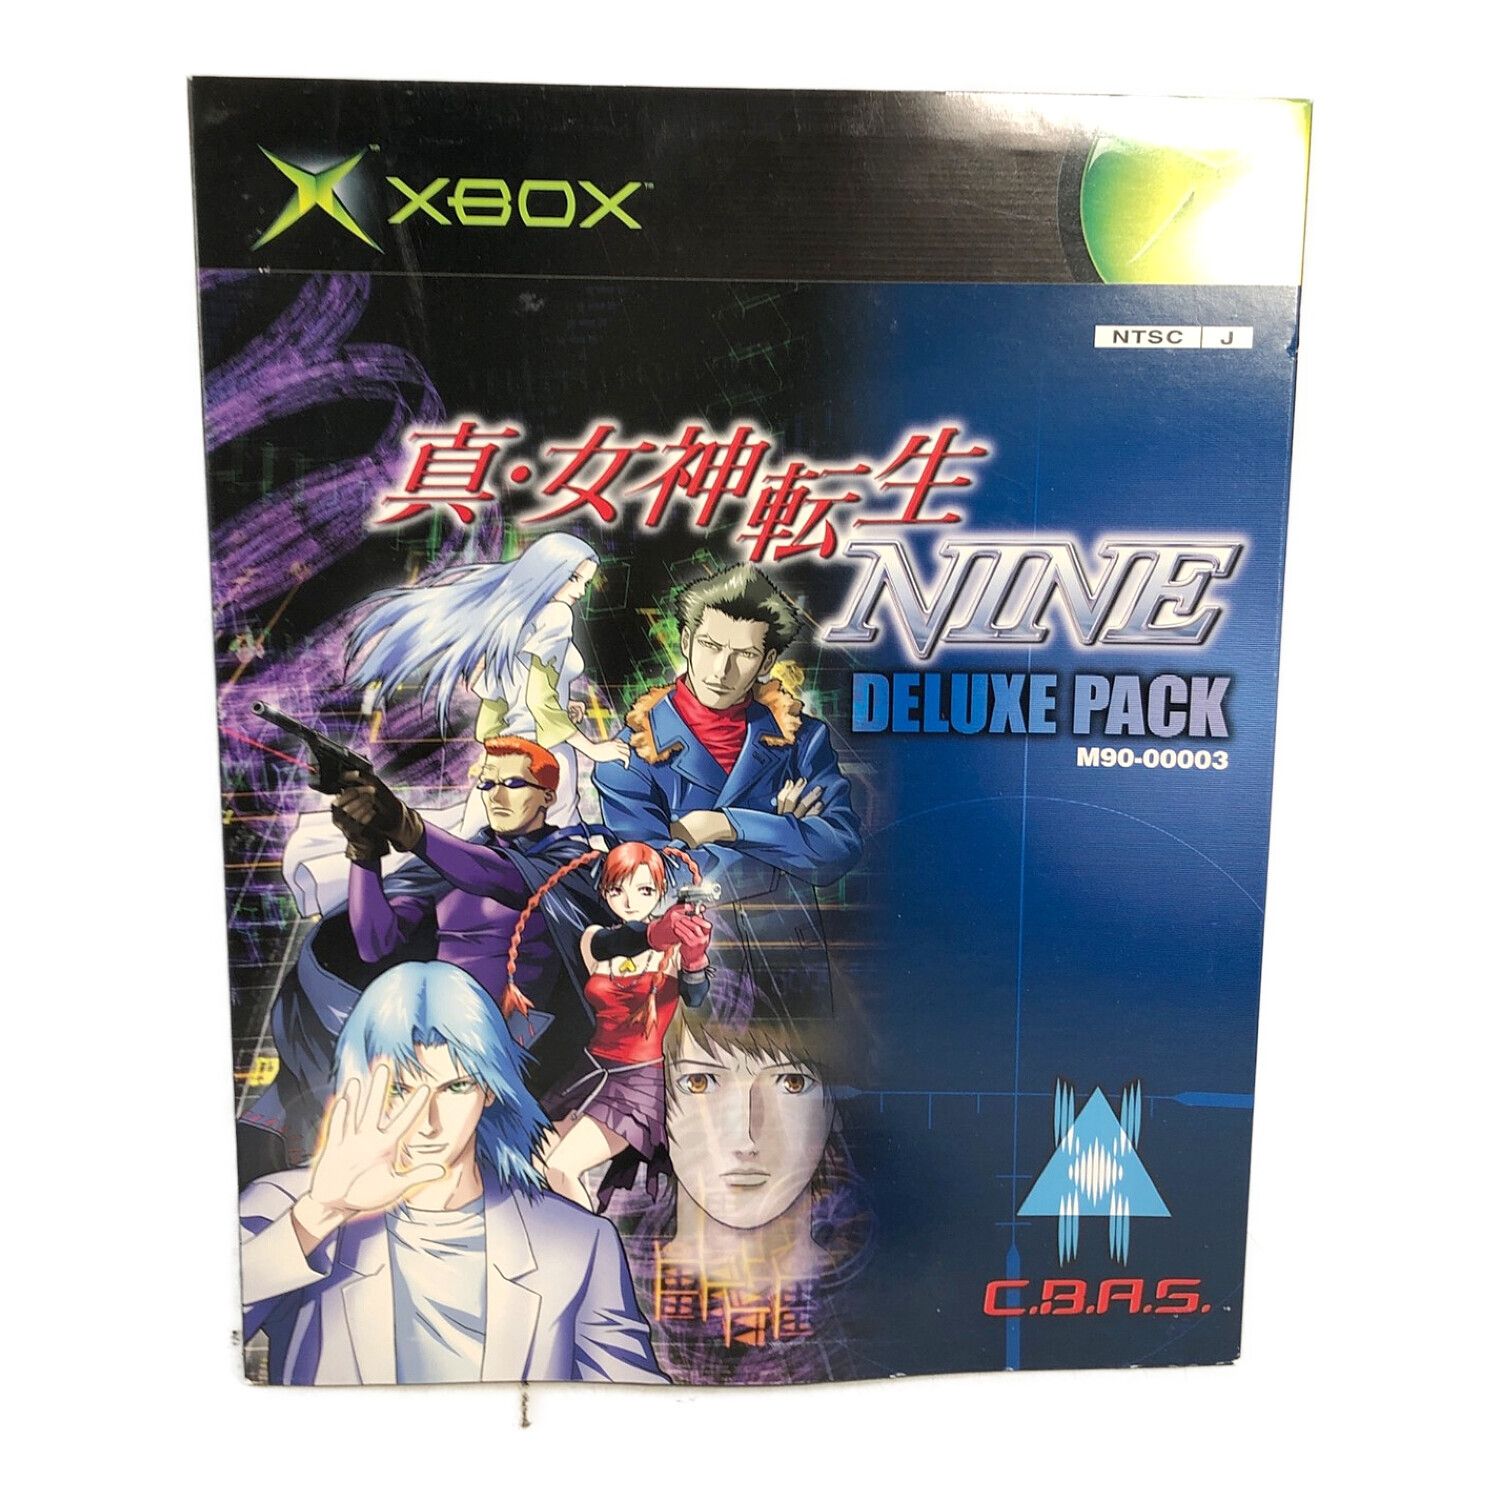 XBOX 真・女神転生NINE DELUXE PACK M90-00003 バインダー欠品